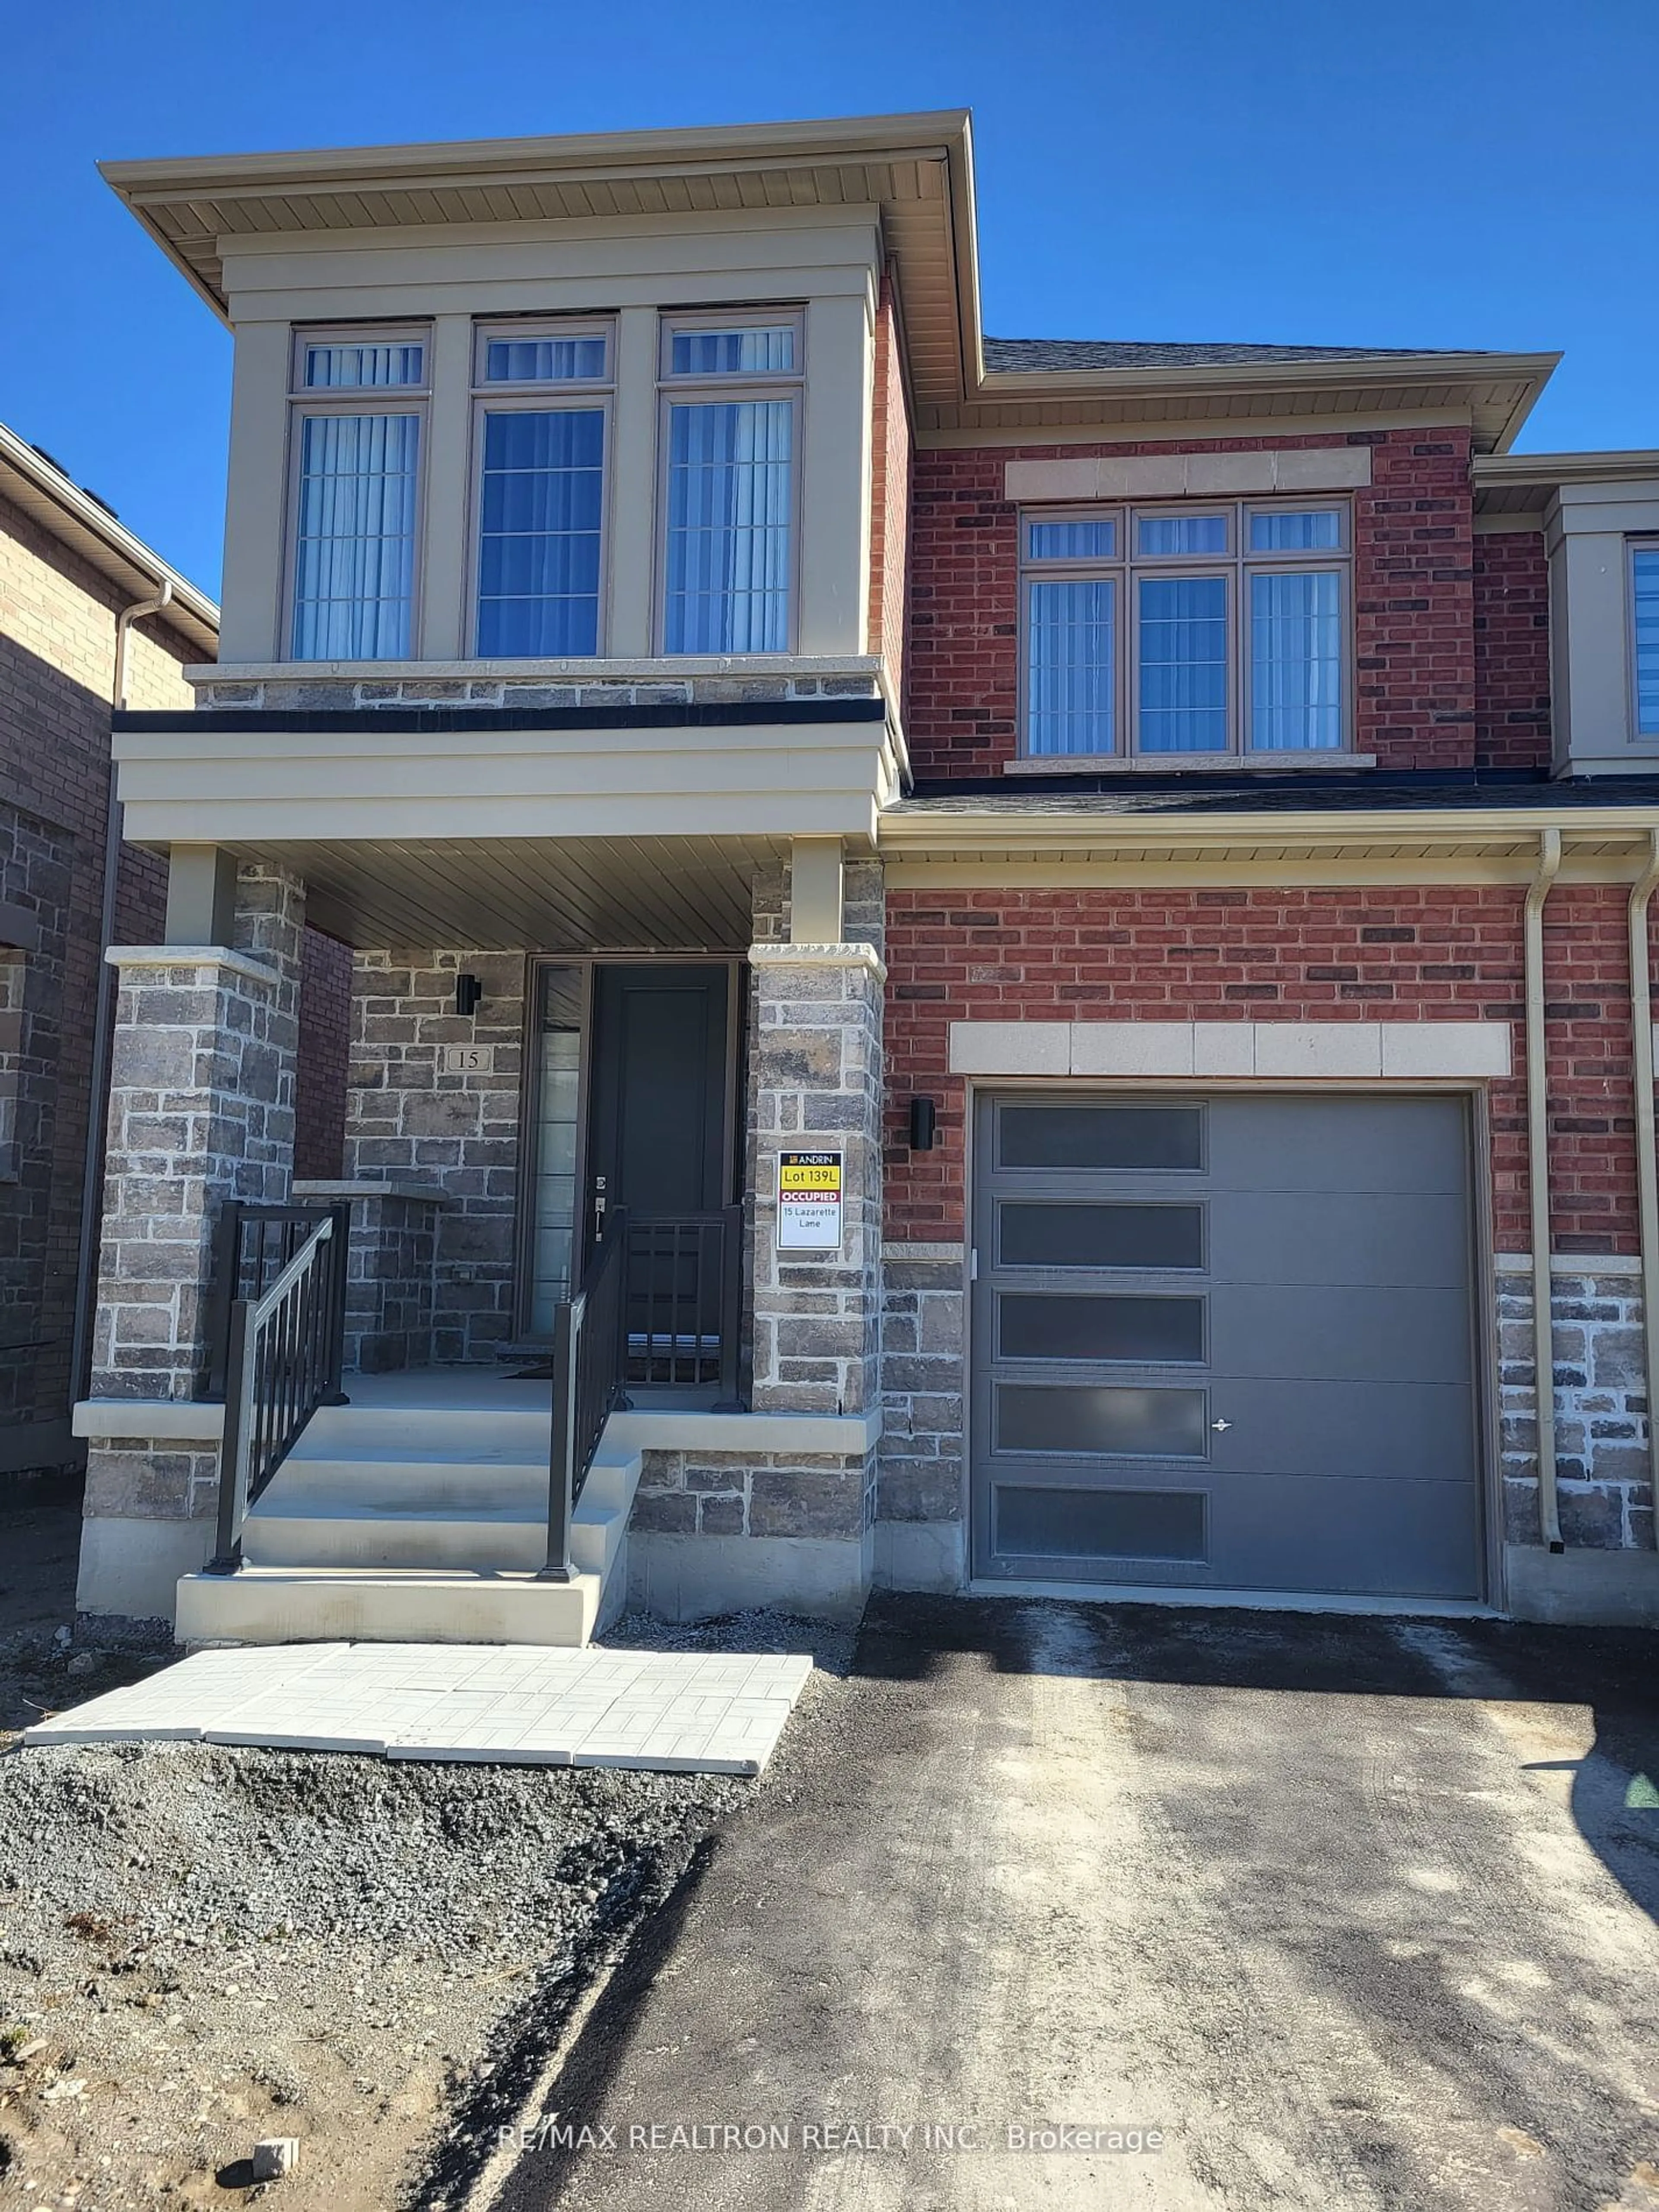 Home with brick exterior material for 15 Lazarette Lane, East Gwillimbury Ontario L9N 0V6